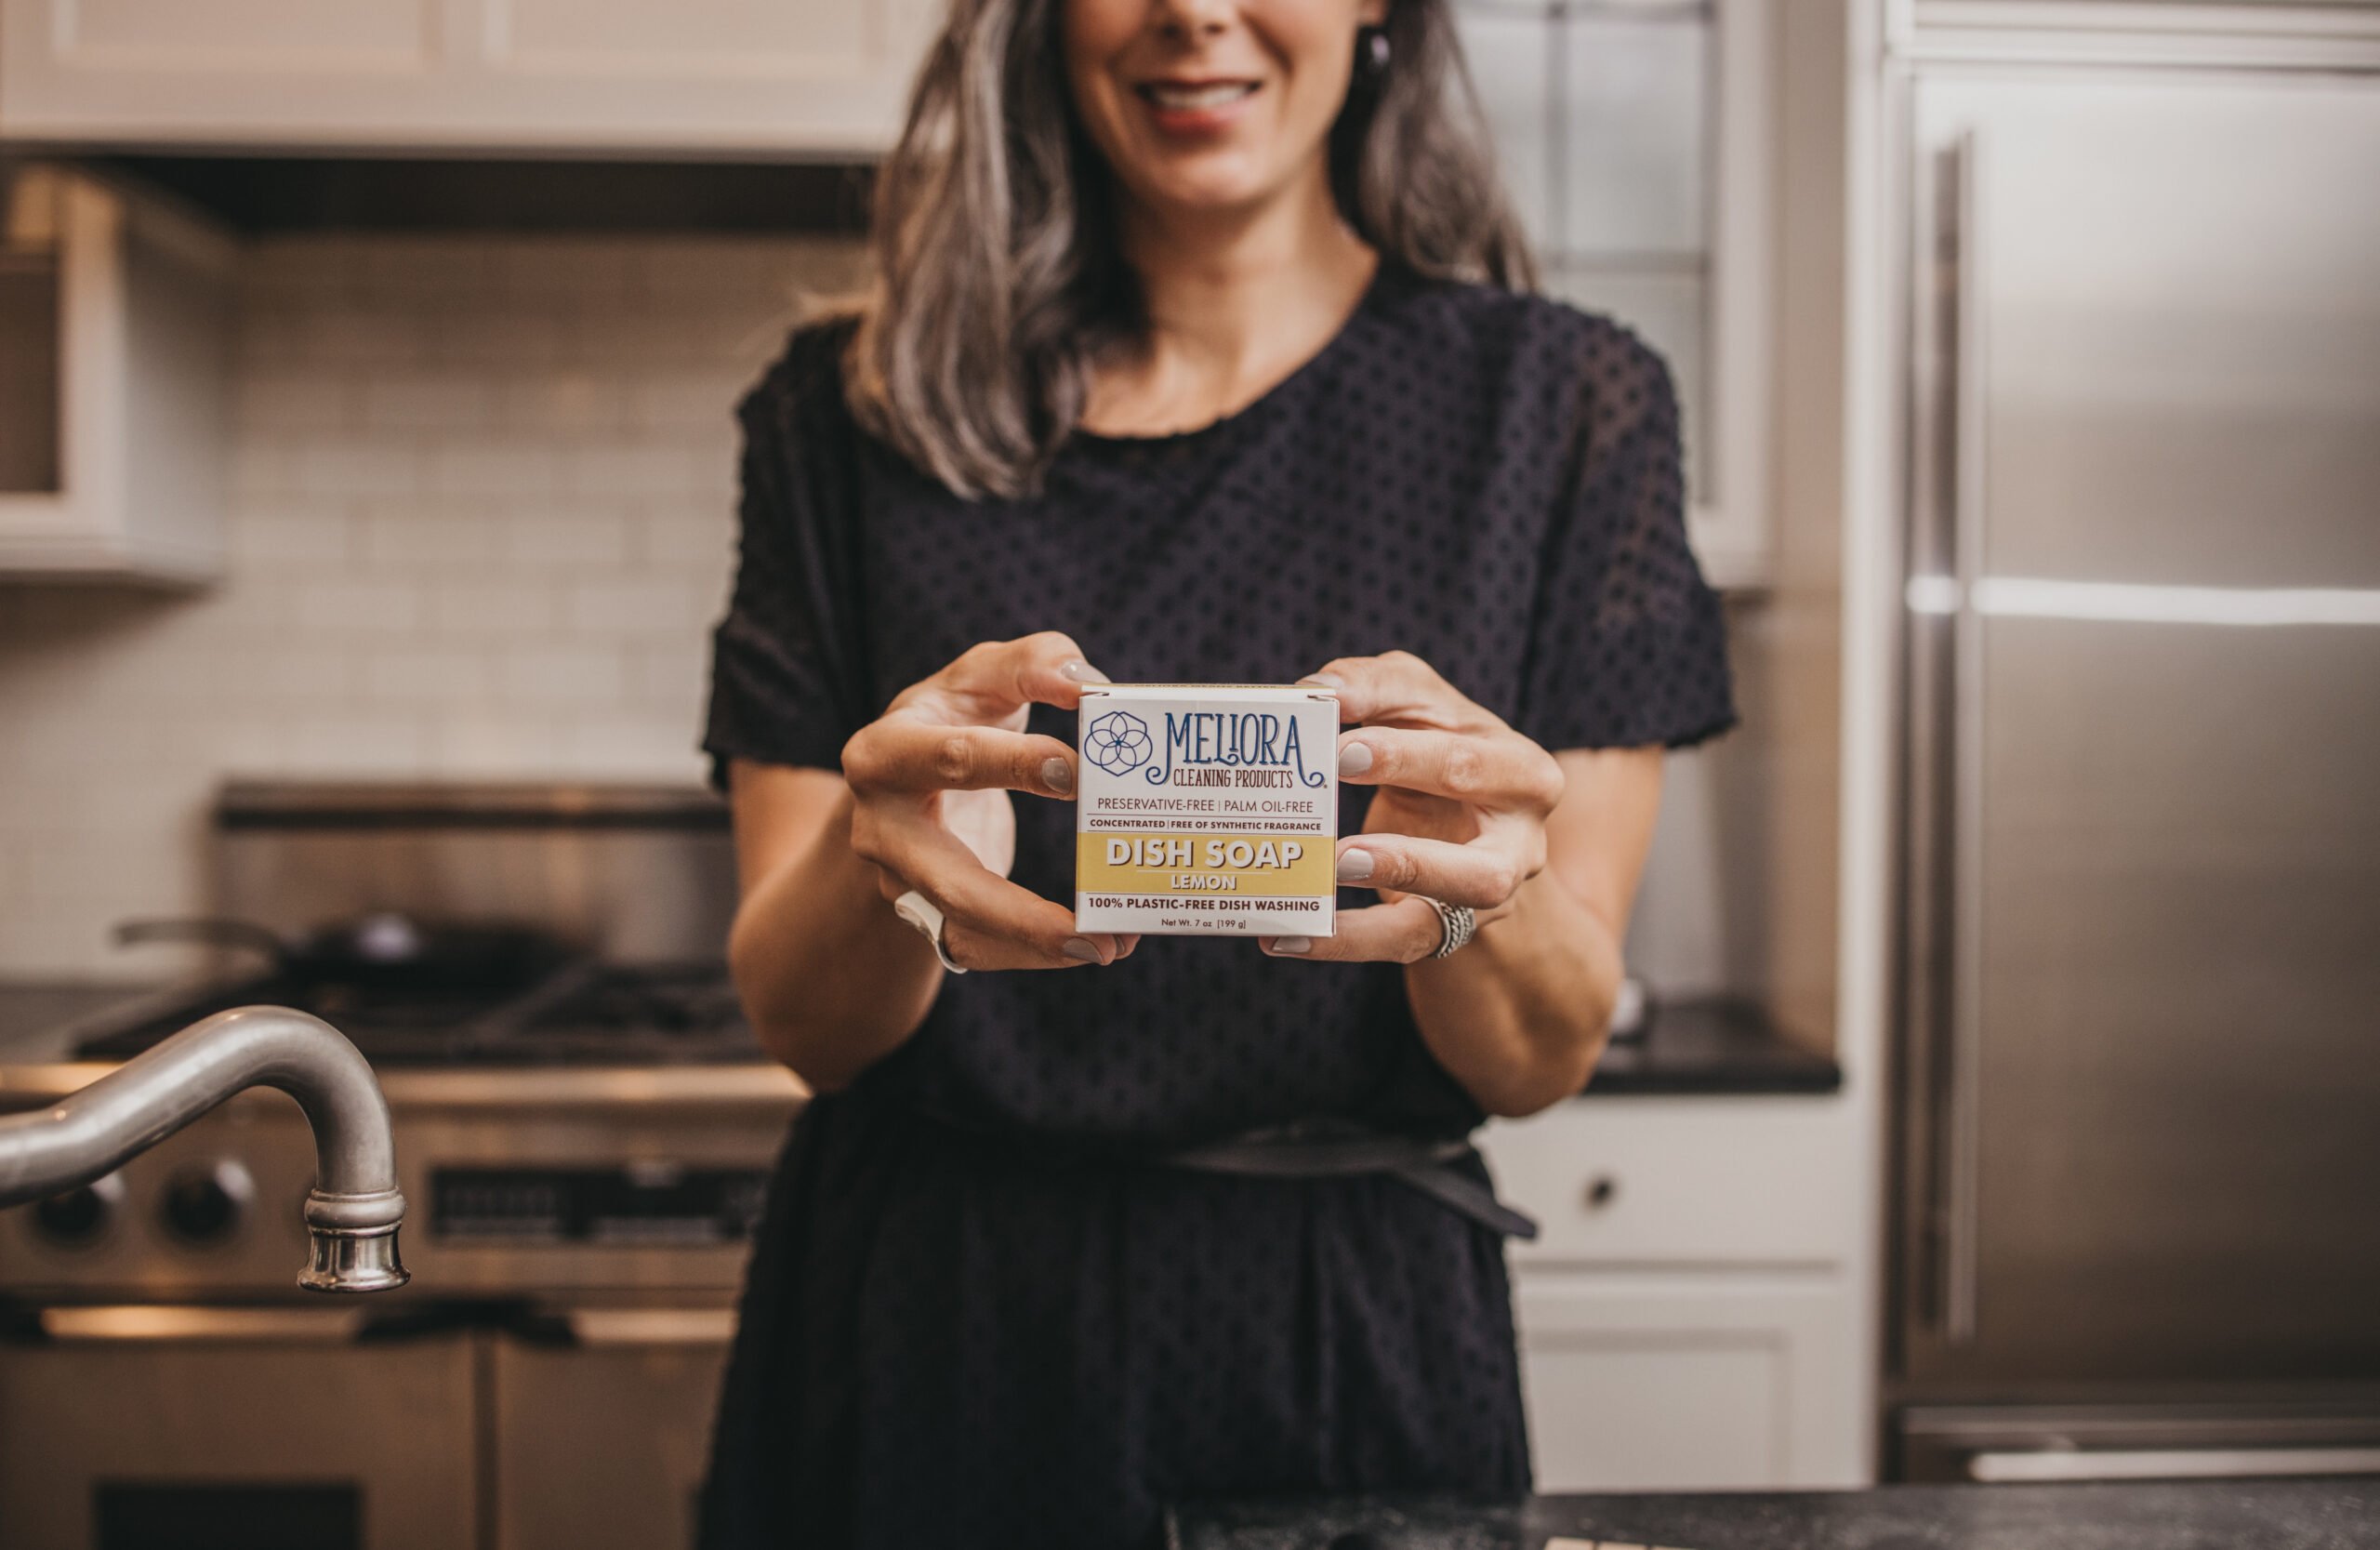 A woman holds up a box of dish soap.